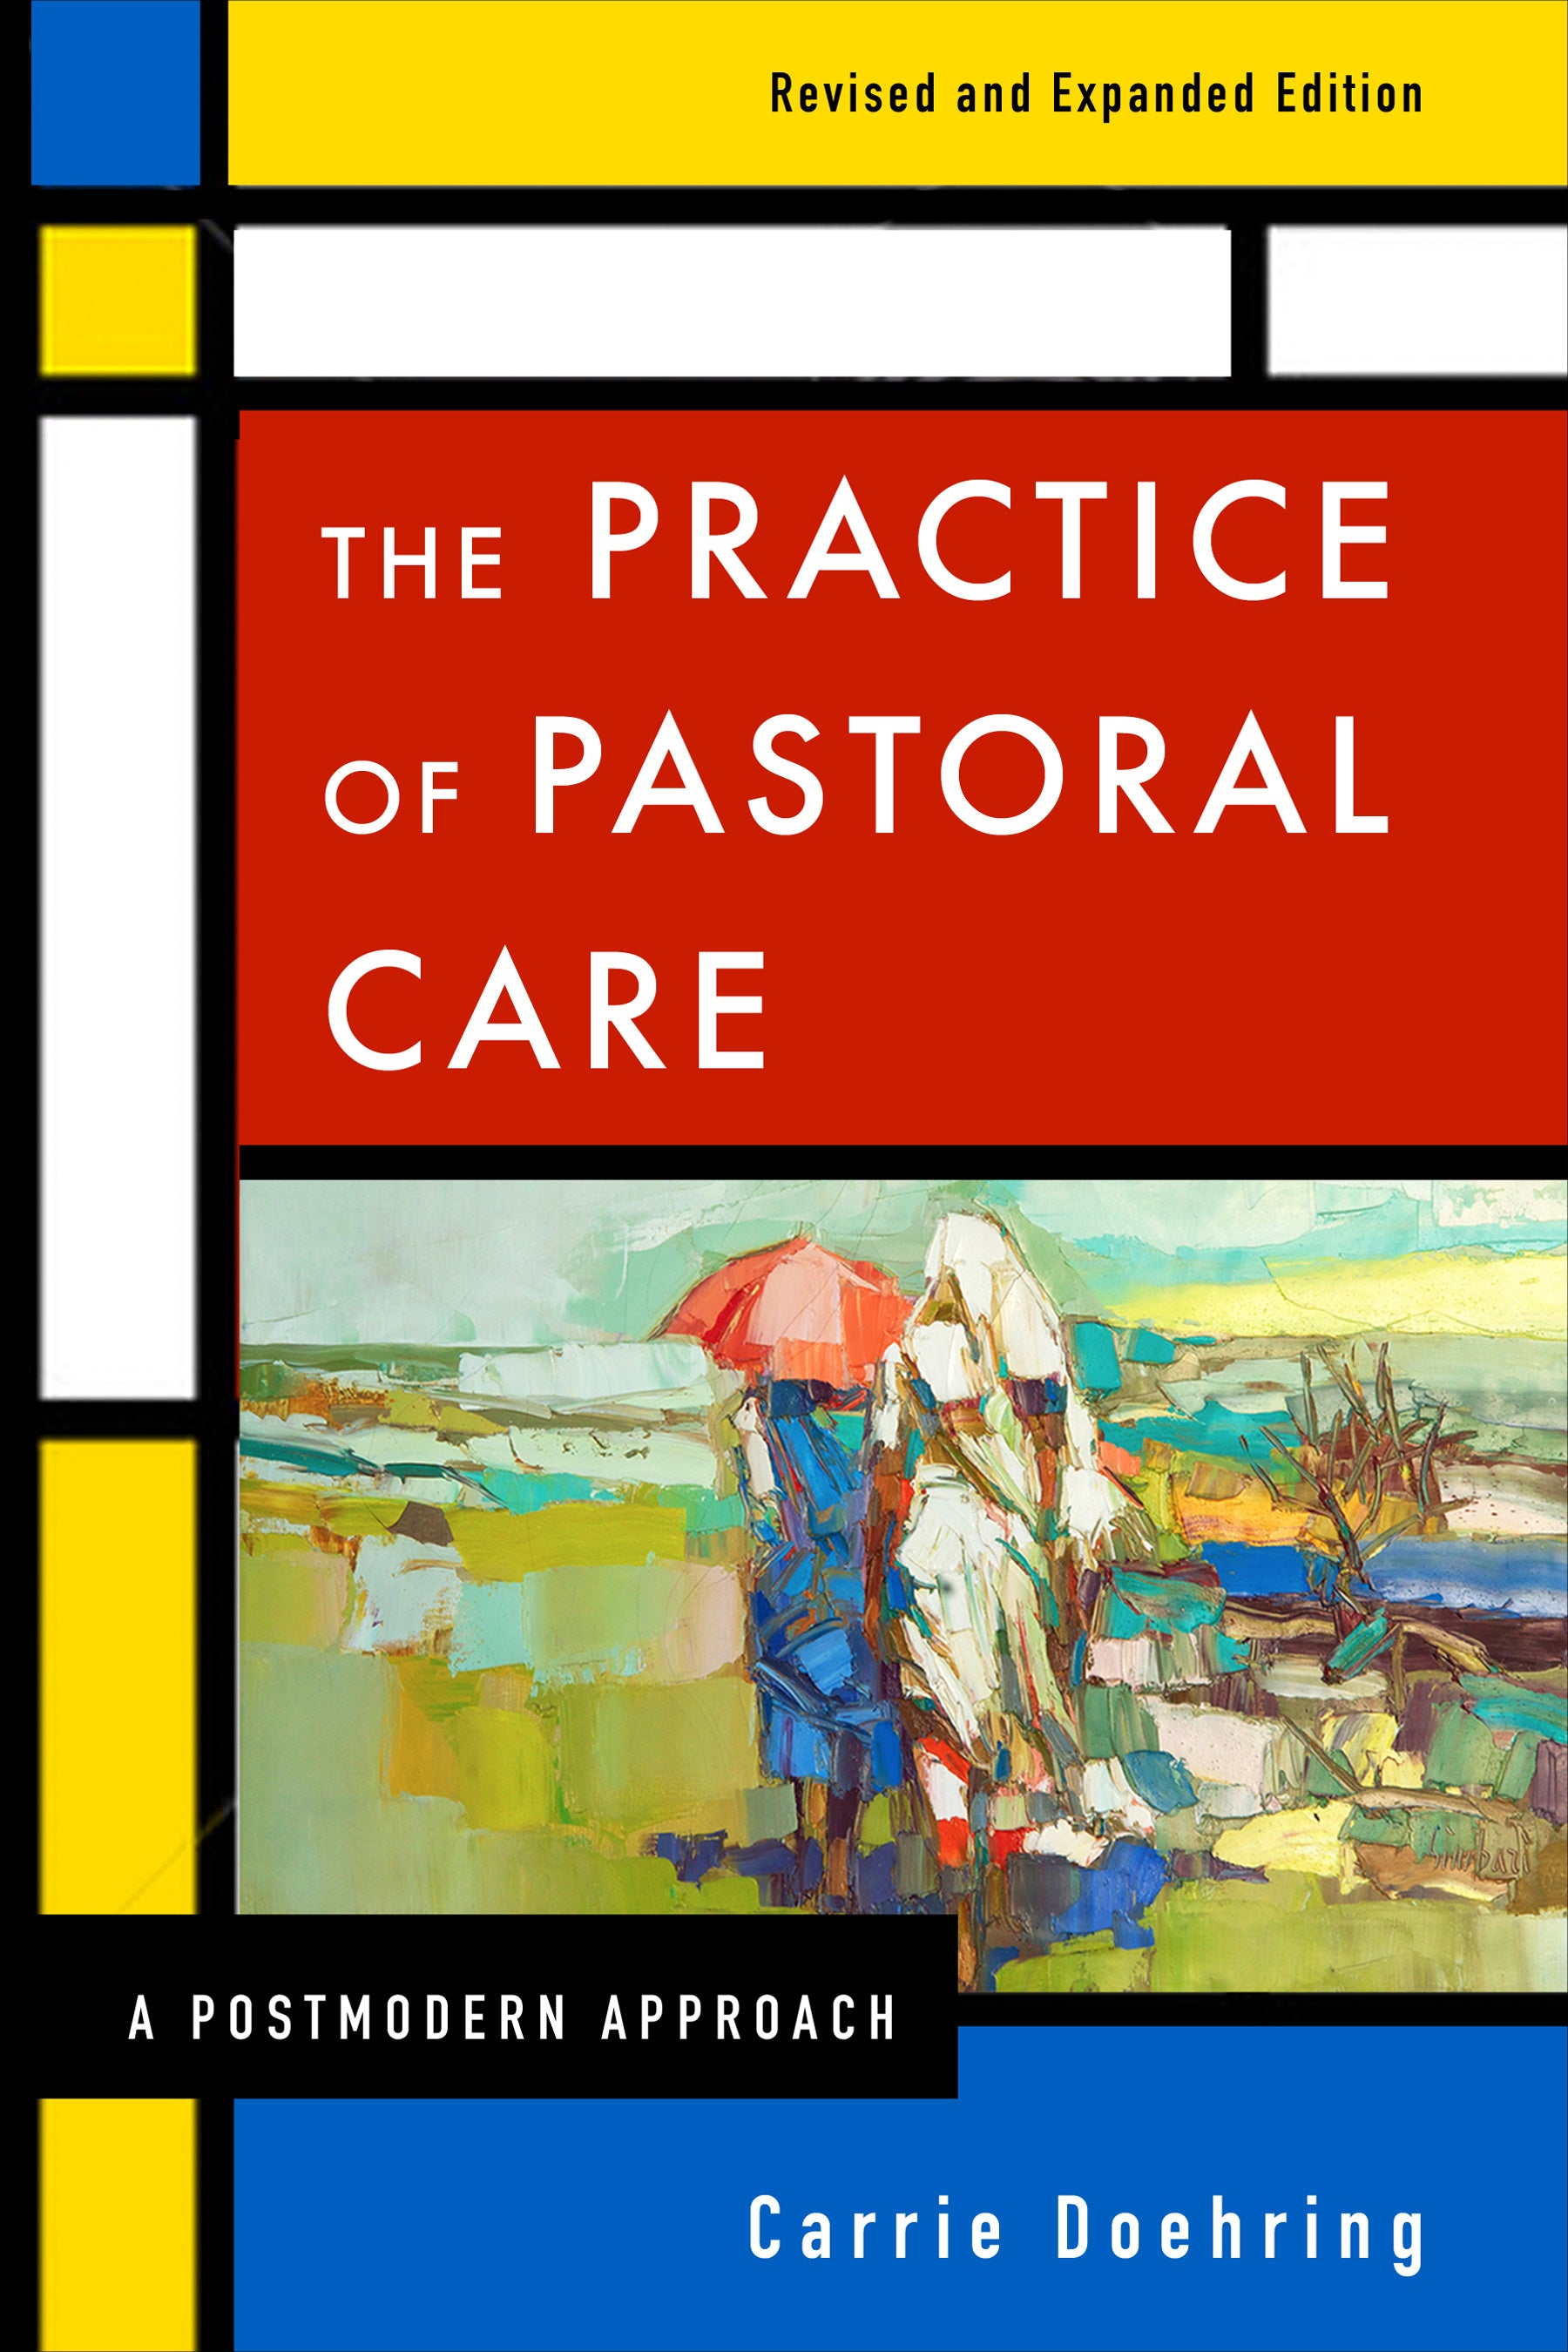 Image of The Practice of Pastoral Care other